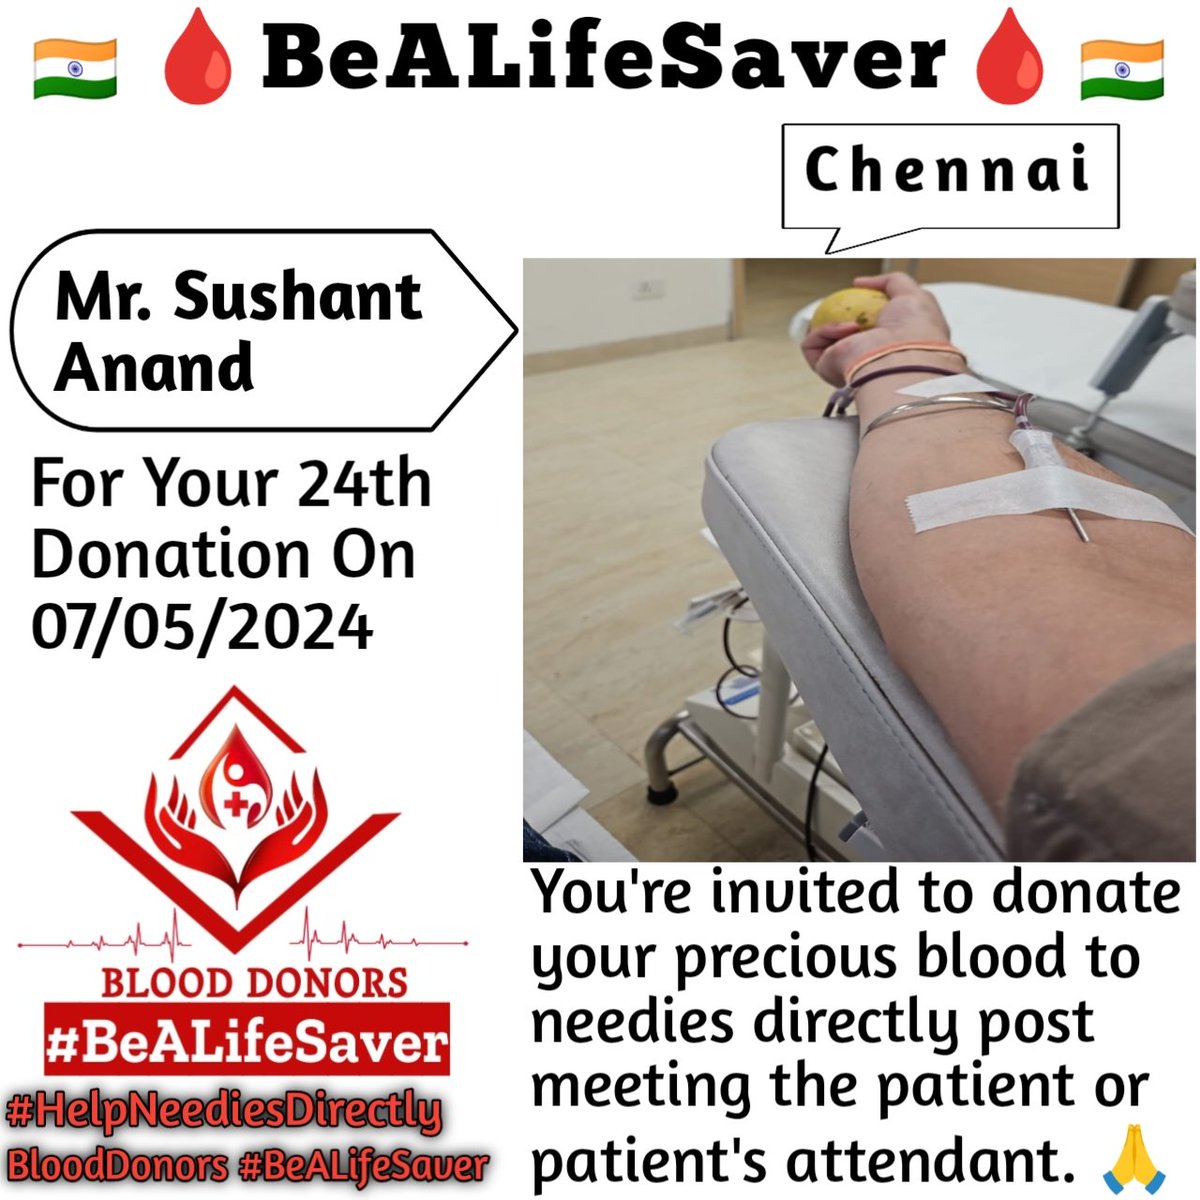 Chennai BeALifeSaver
Kudos_Mr_Sushant_Anand_Ji
#HelpNeediesDirectly

Today's hero
Mr. Sushant_Anand Ji donated blood in Chennai for the 24th Time for one of the needies. Heartfelt Gratitude and Respect to Sushant Anand Ji for his blood donation for Patient admitted in Chennai.